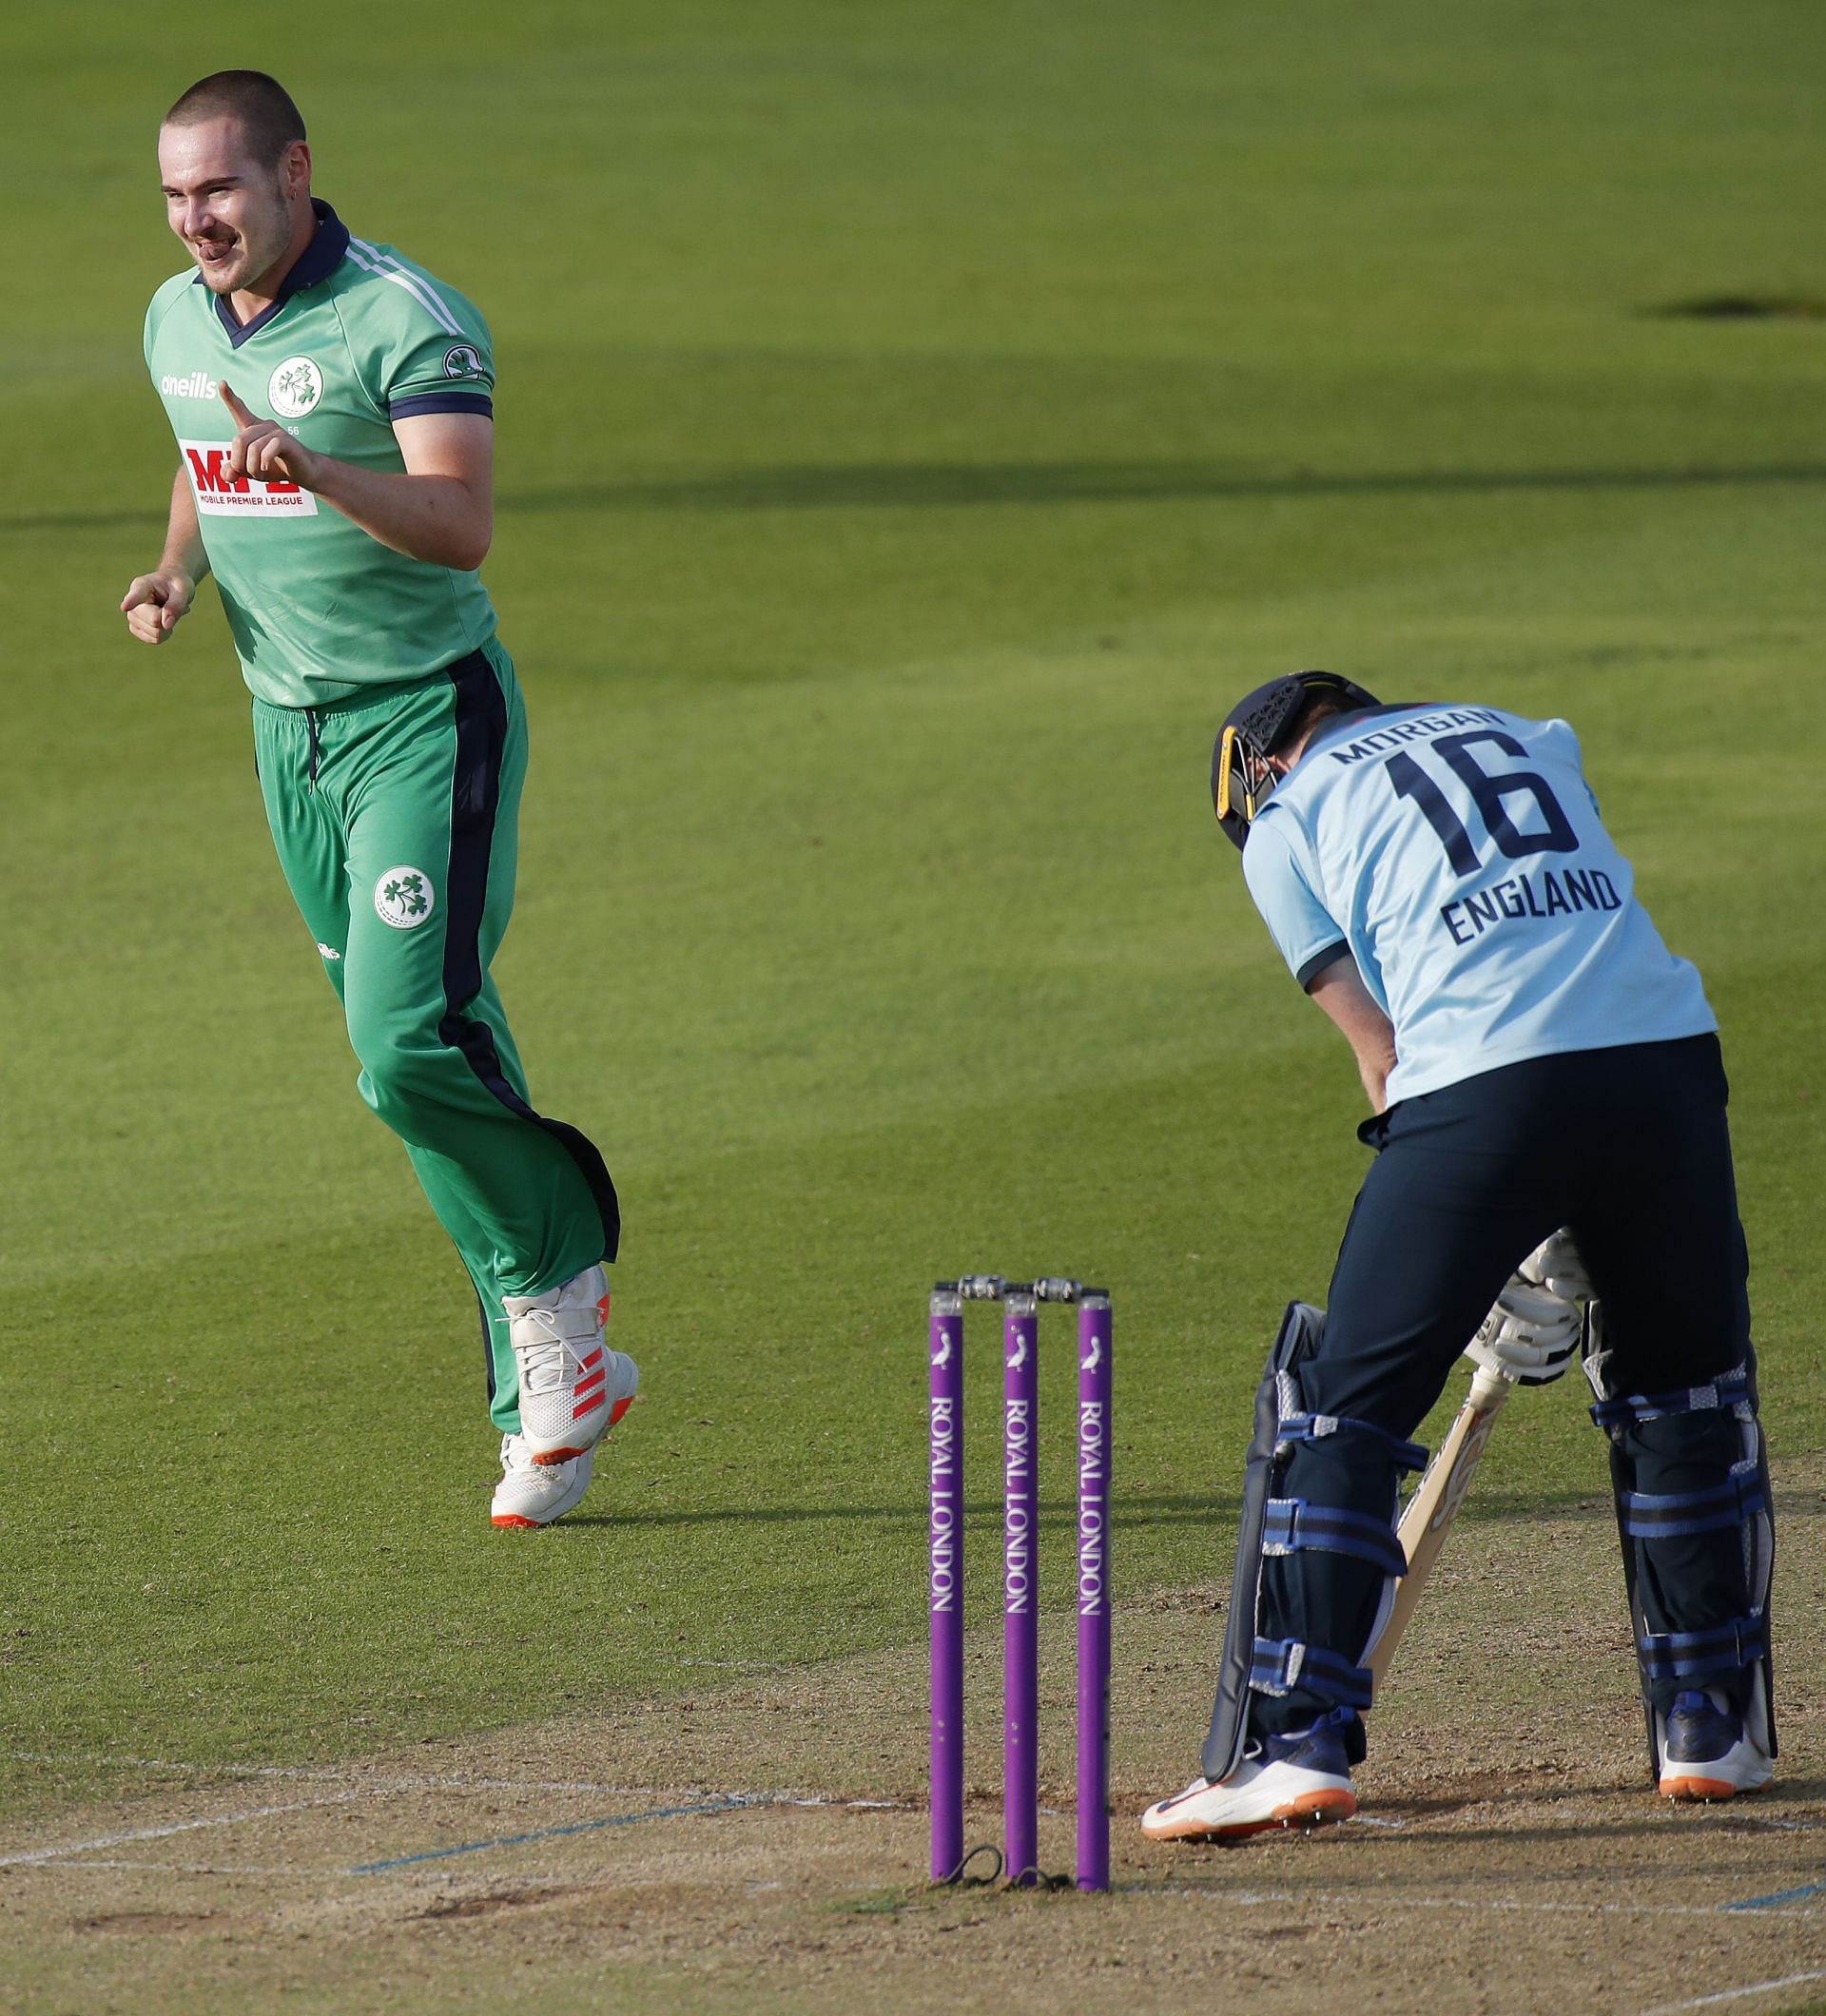 Joshua Little celebrates dismissing Eoin Morgan during the Second ODI between England and Ireland in the Royal London Series at The Ageas Bowl on August 1, 2020, in Southampton (Getty Images)